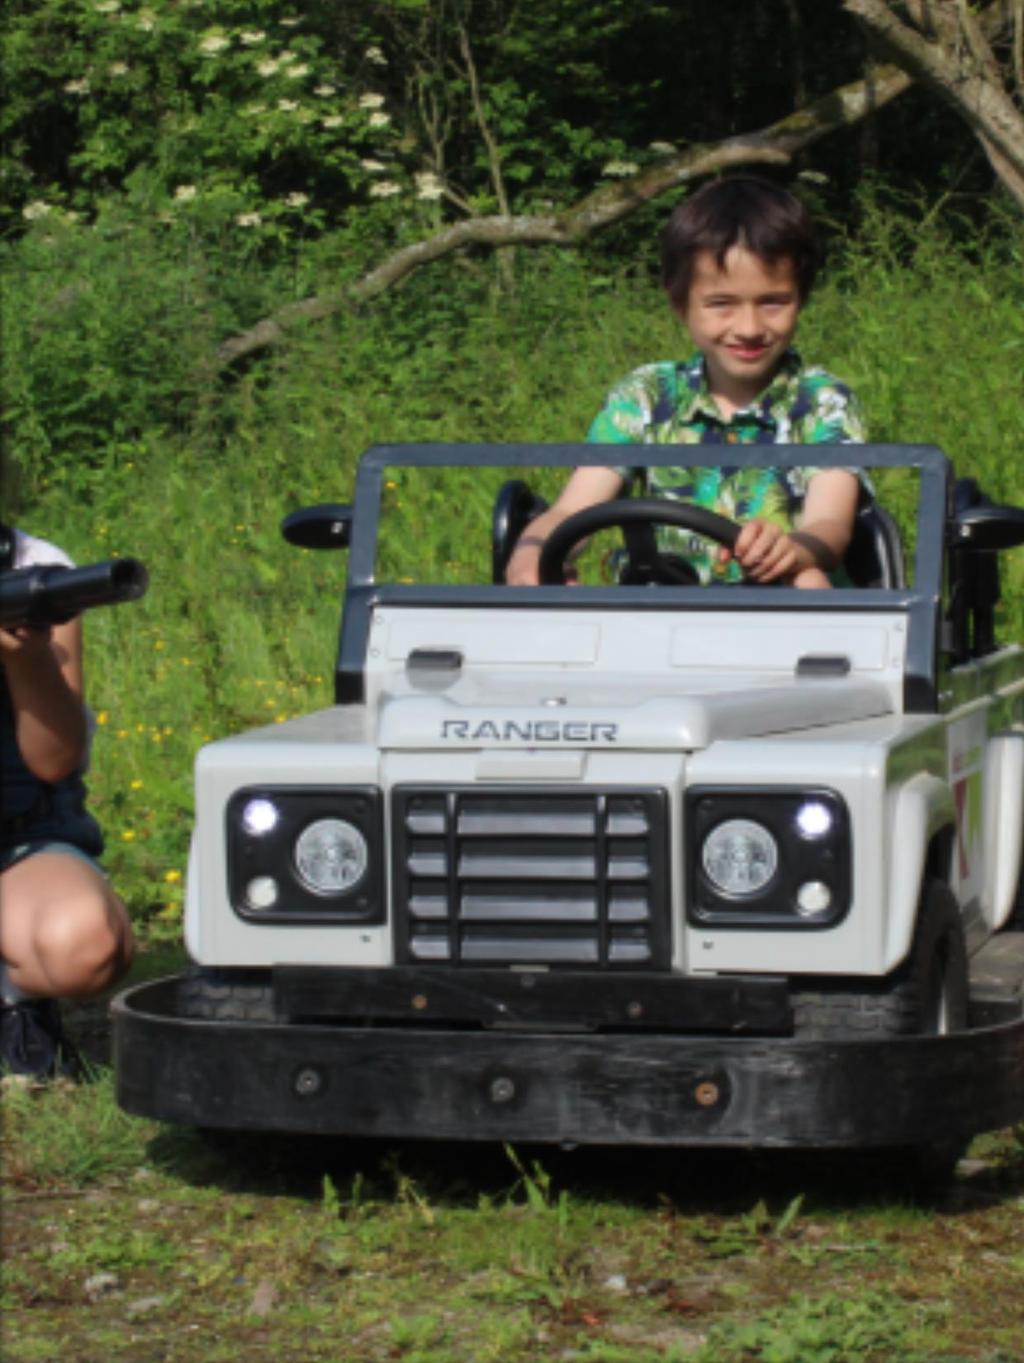 MINI RANGER SAFARI PARTY Games to include: Guided convoys in our natural environment Relay races Drag races Cops and robbers Treasure hunts Guided safari tours 1 hour driving and games on the